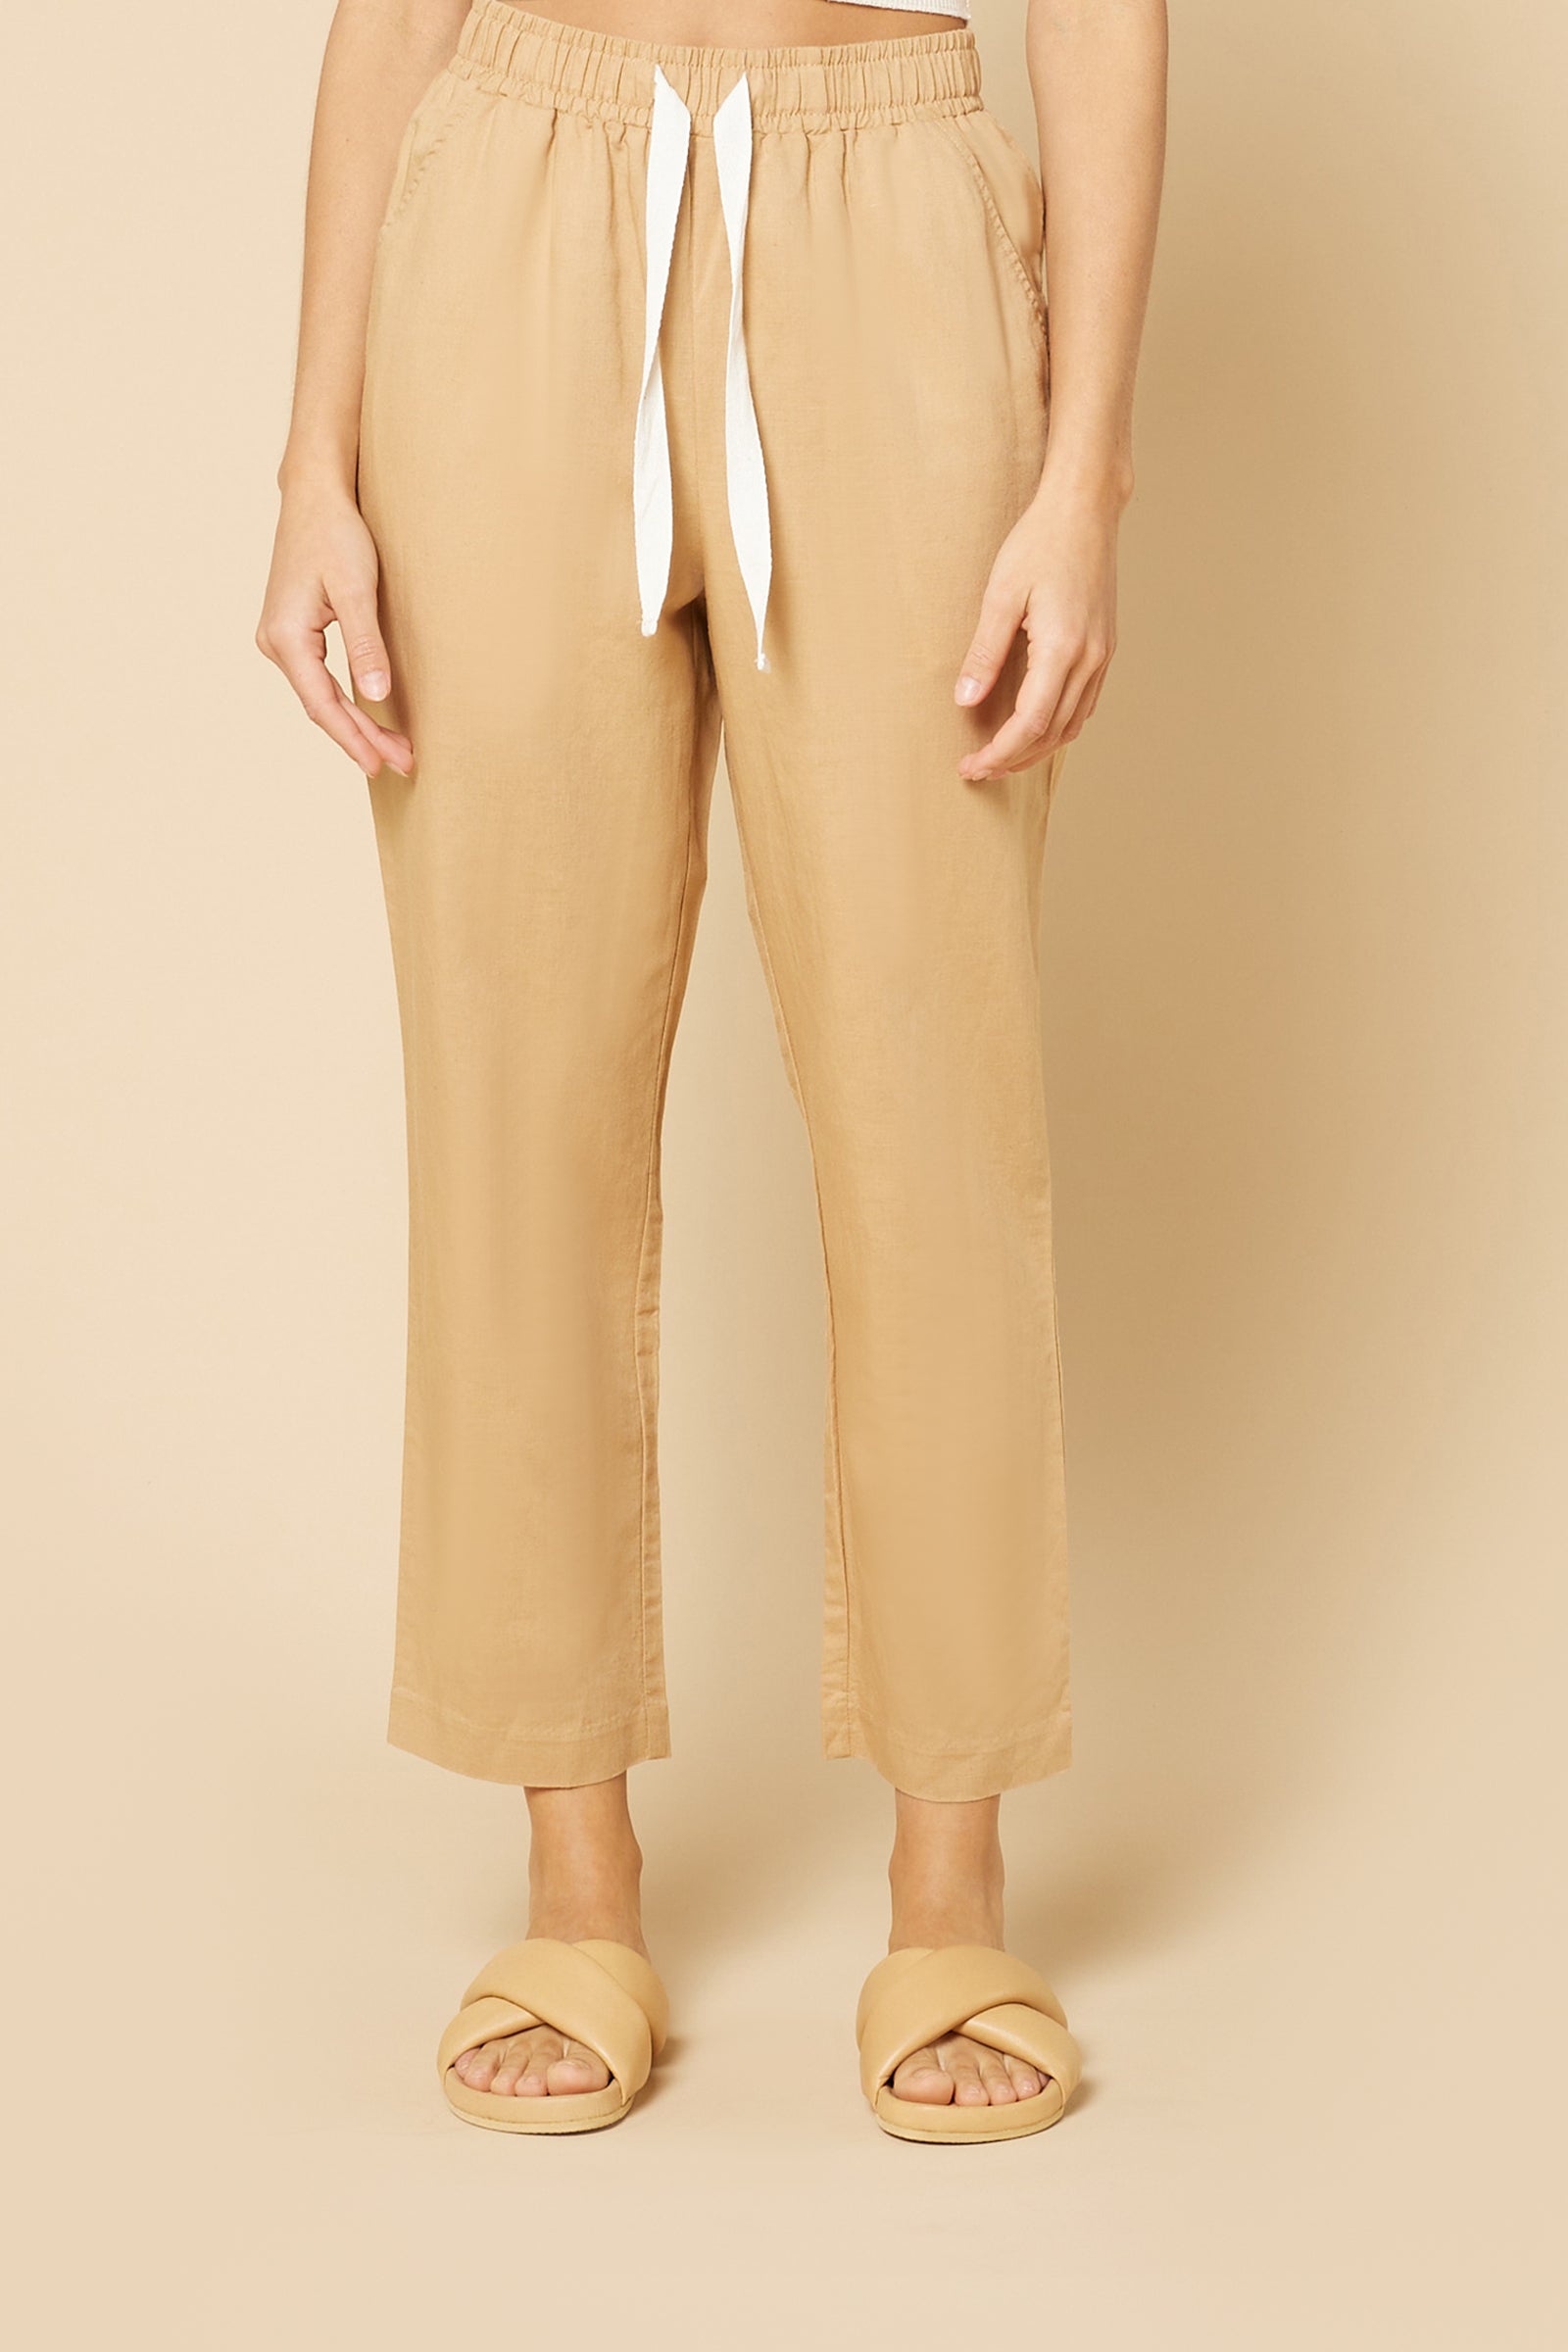 Nude Lucy Nude Classic Pant in a Light Brown Caramel Colour